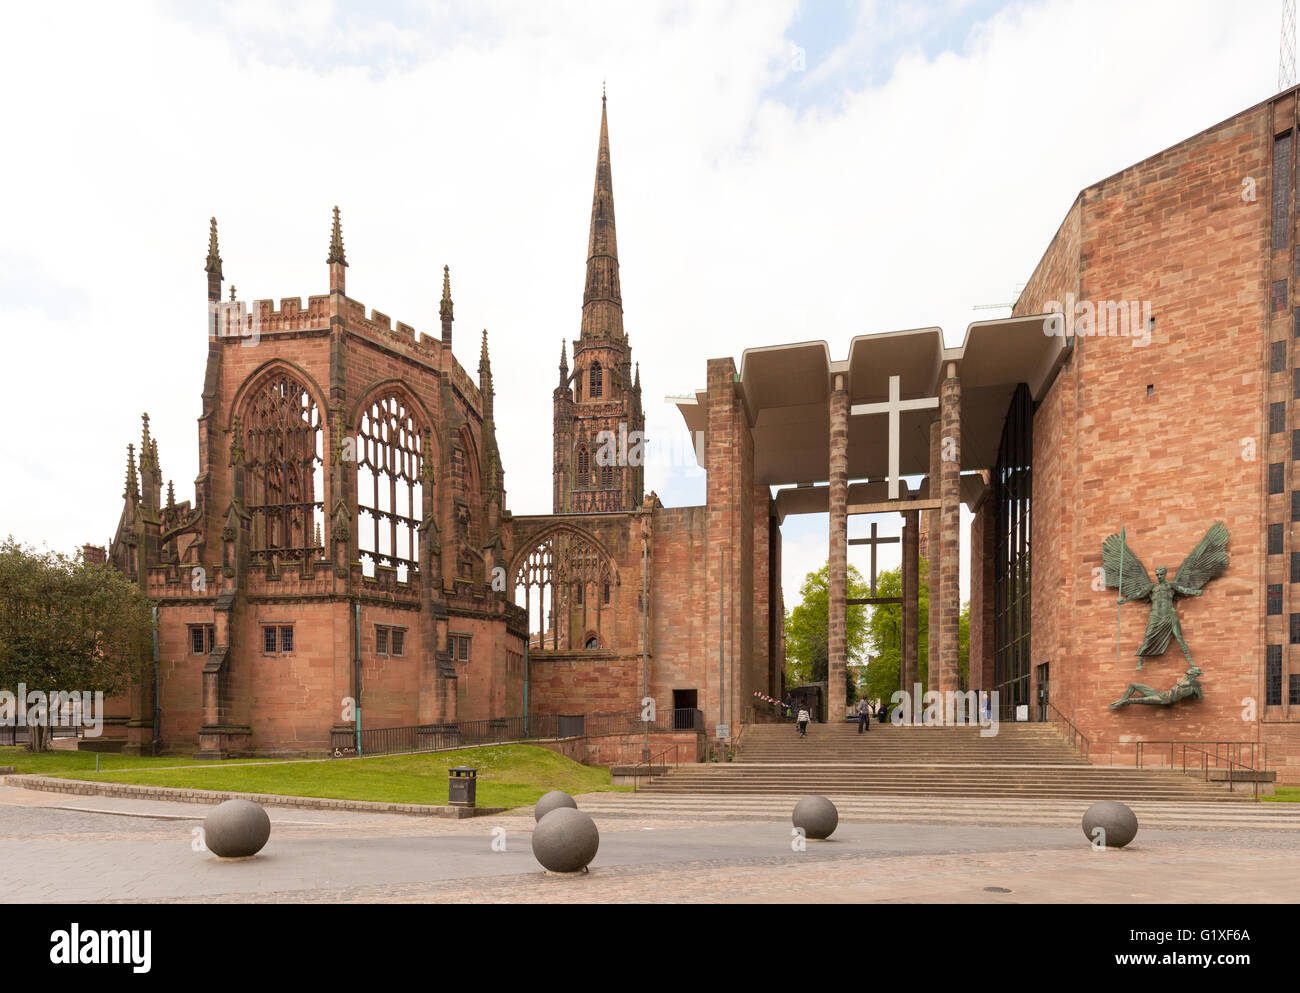 The Old, bombed St. Michael's Coventry Cathedral next to the New St. Michael's Coventry Cathedral, Coventry, Warwickshire UK Stock Photo